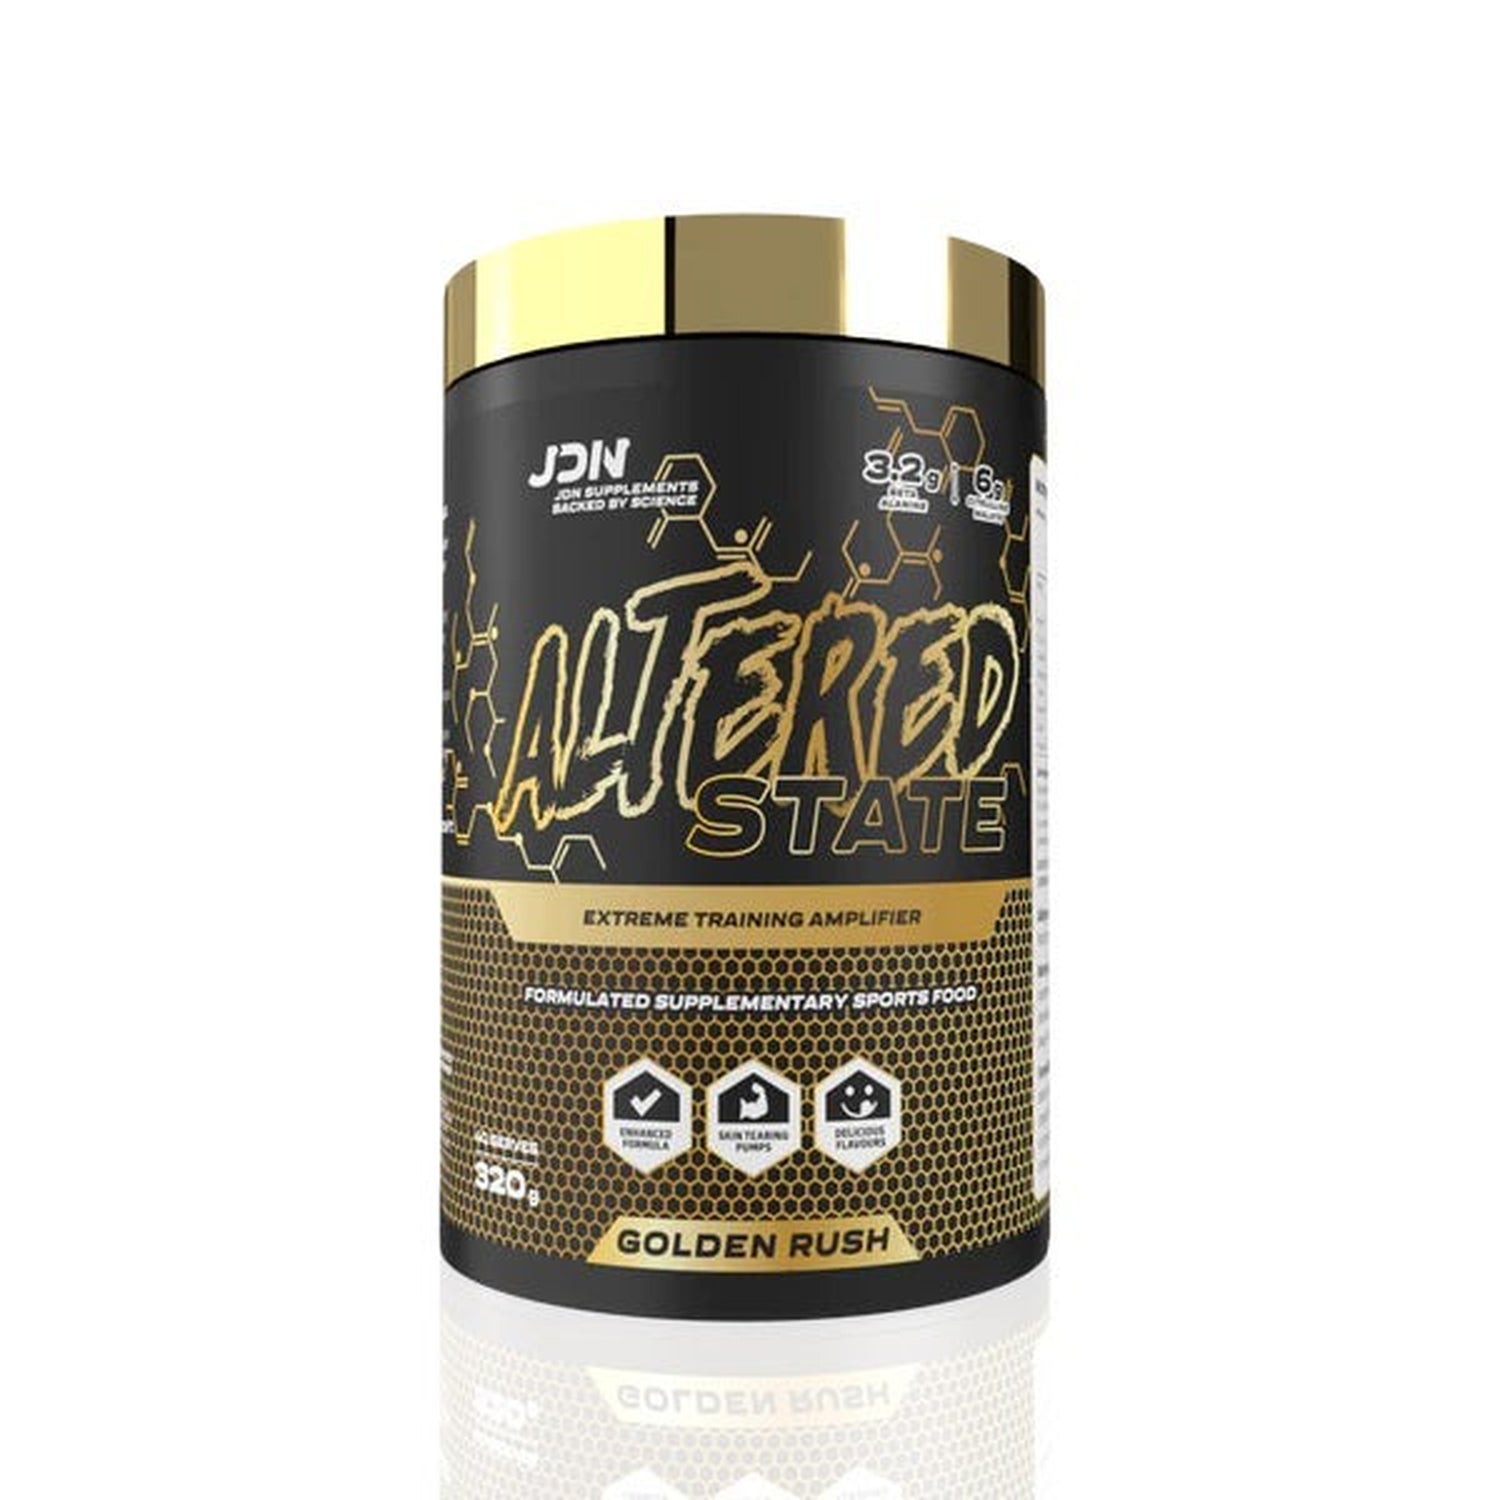 JDN Altered State Pre Workout